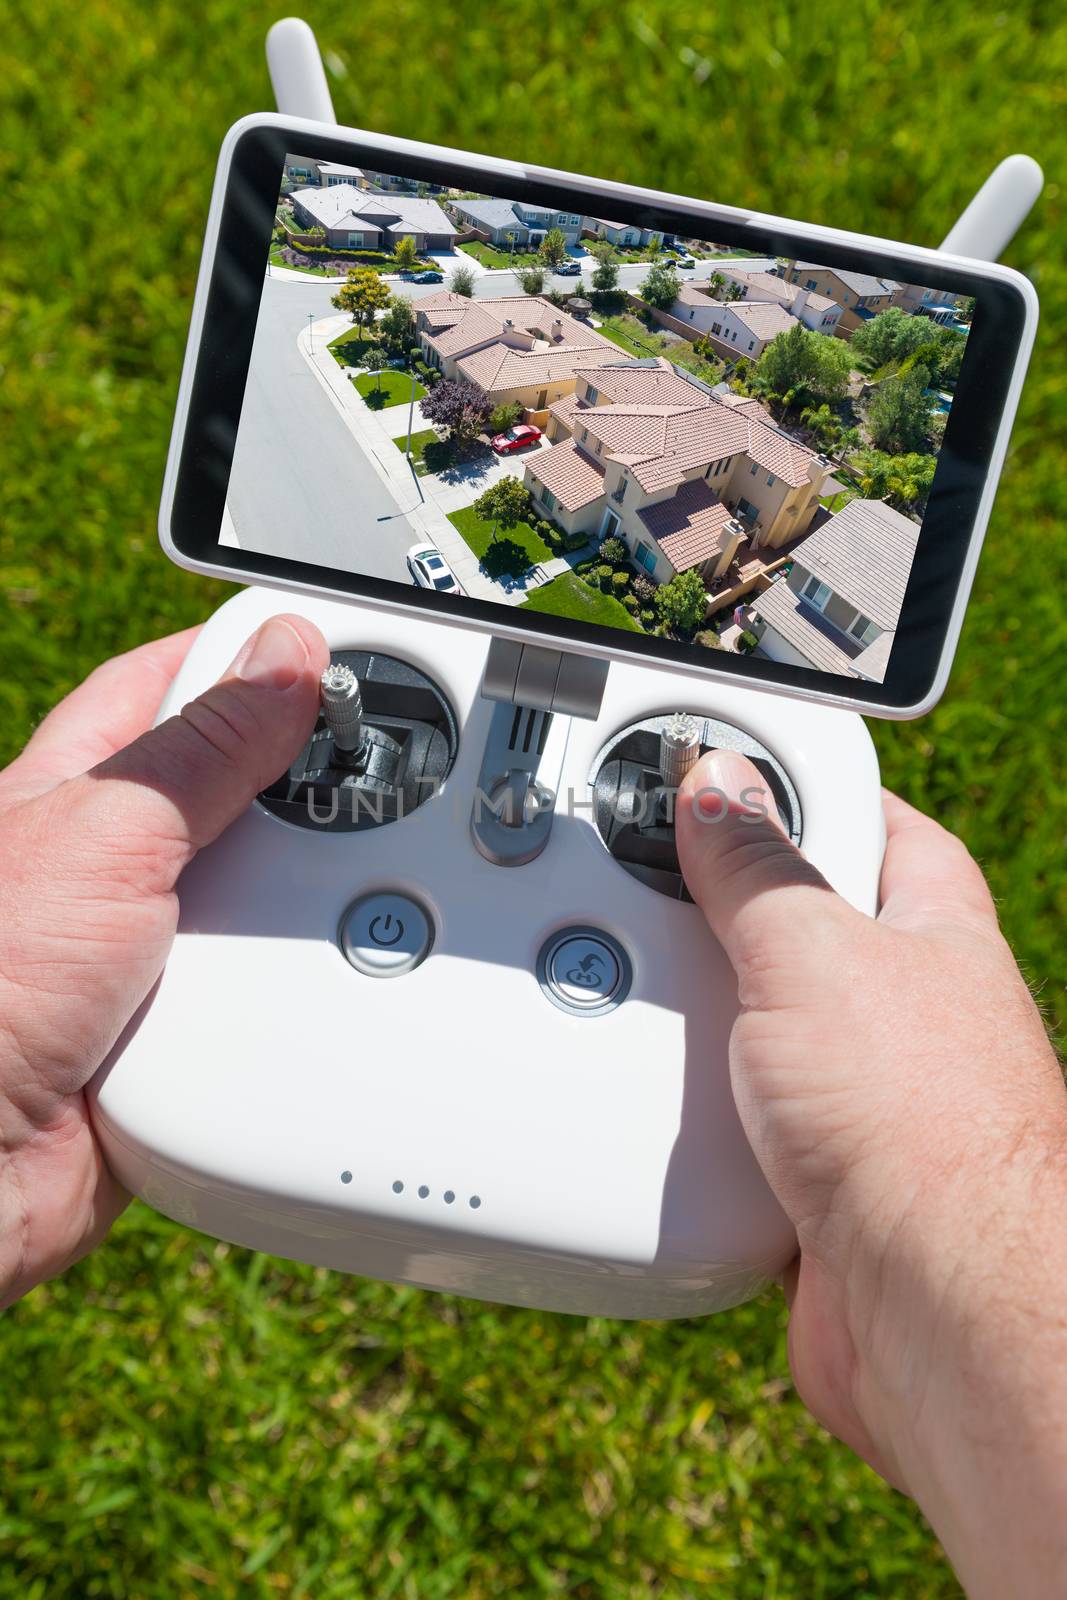 Hands Holding Drone Quadcopter Controller With Residential Homes on Screen. by Feverpitched